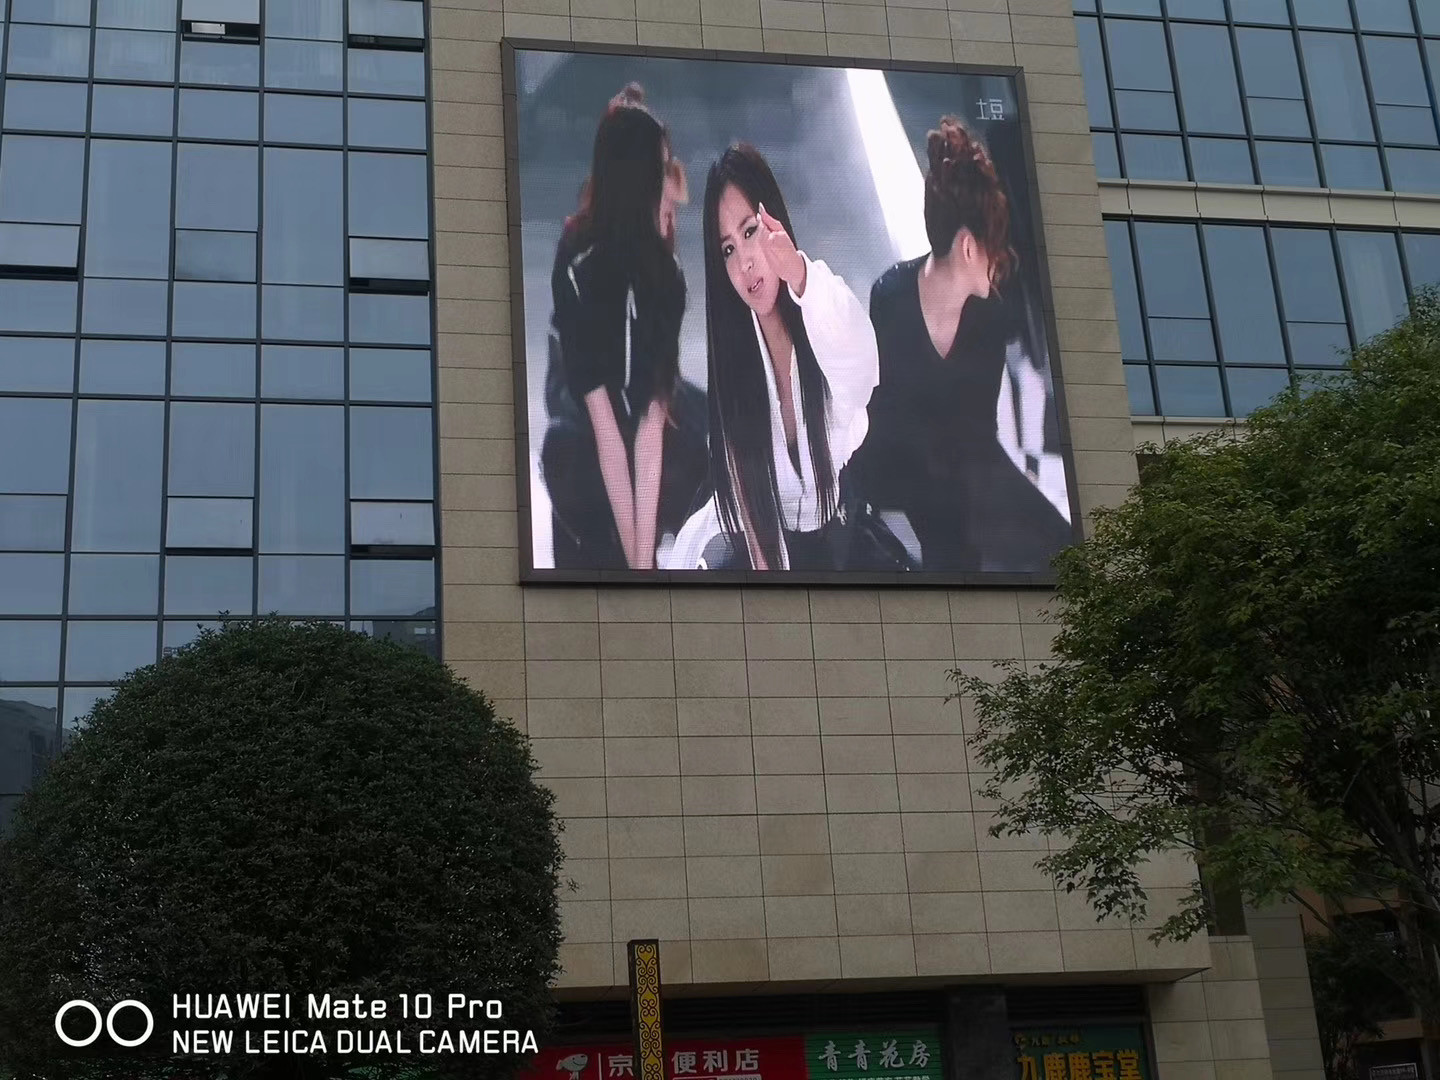 Quality 160*320mm LED Screen P4 Outdoor Advertising LED Display Screen SMD2525 for sale